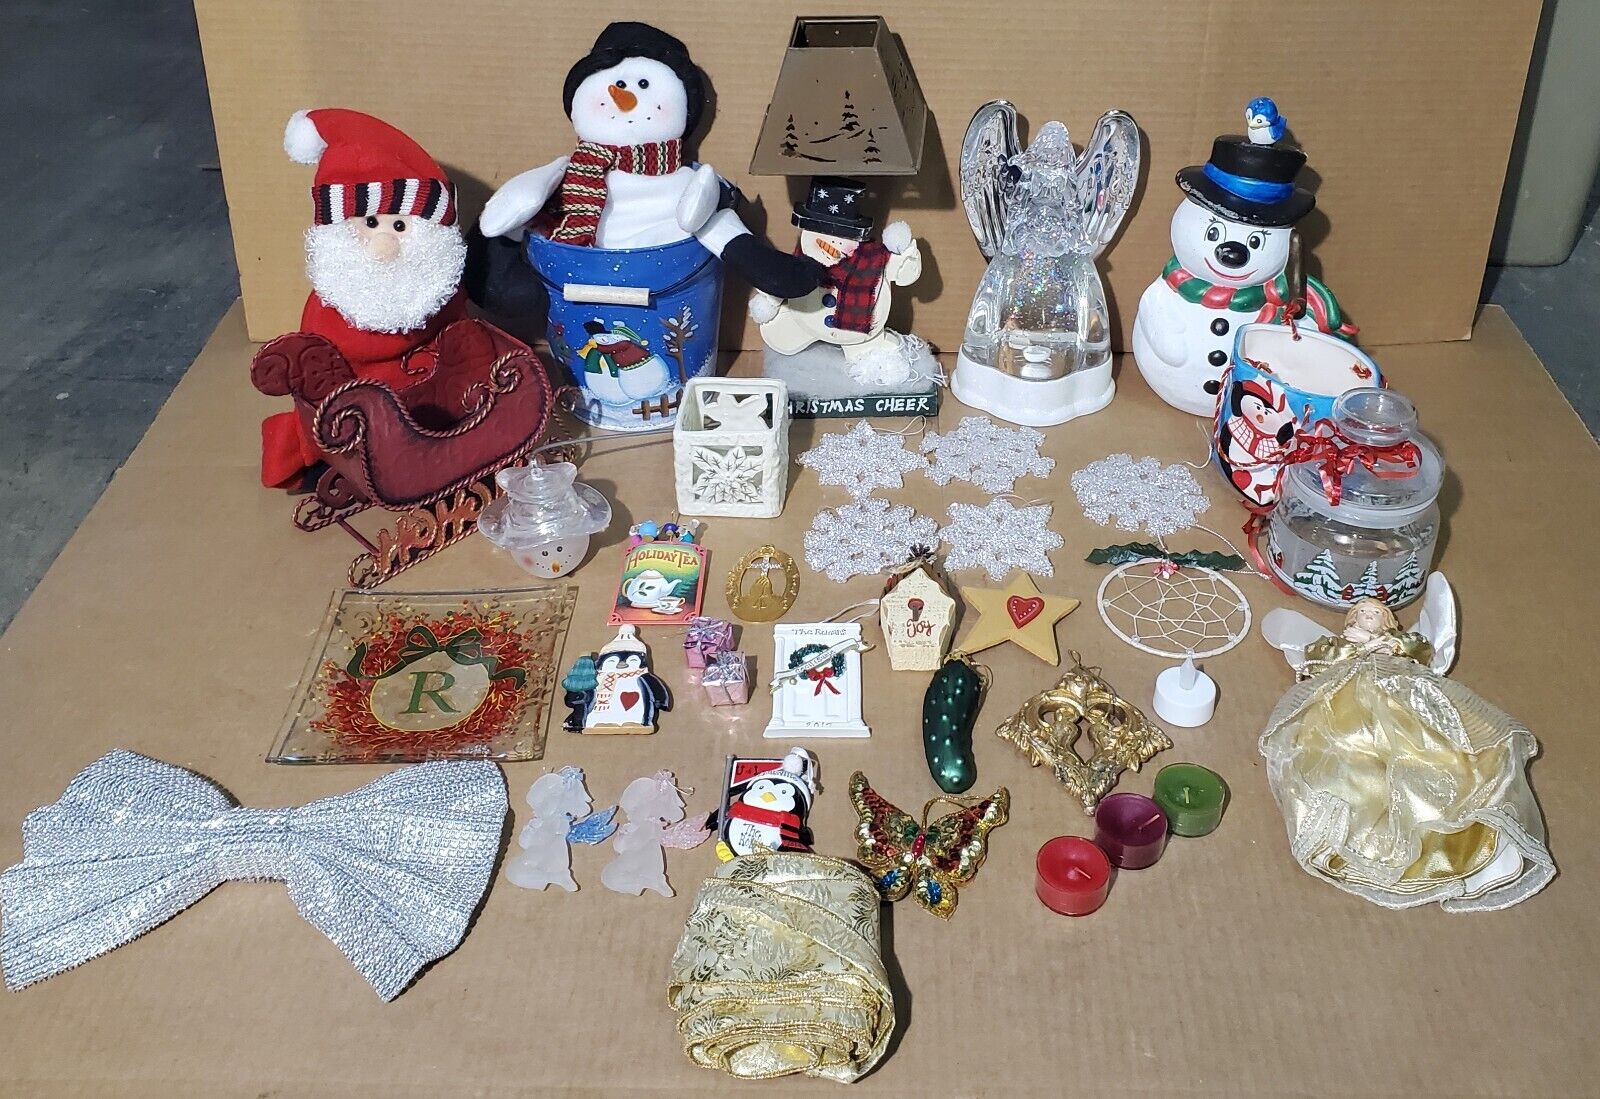 40pc LOT of Christmas Items Decor Snowman Winter Holiday Ornaments Candles MORE